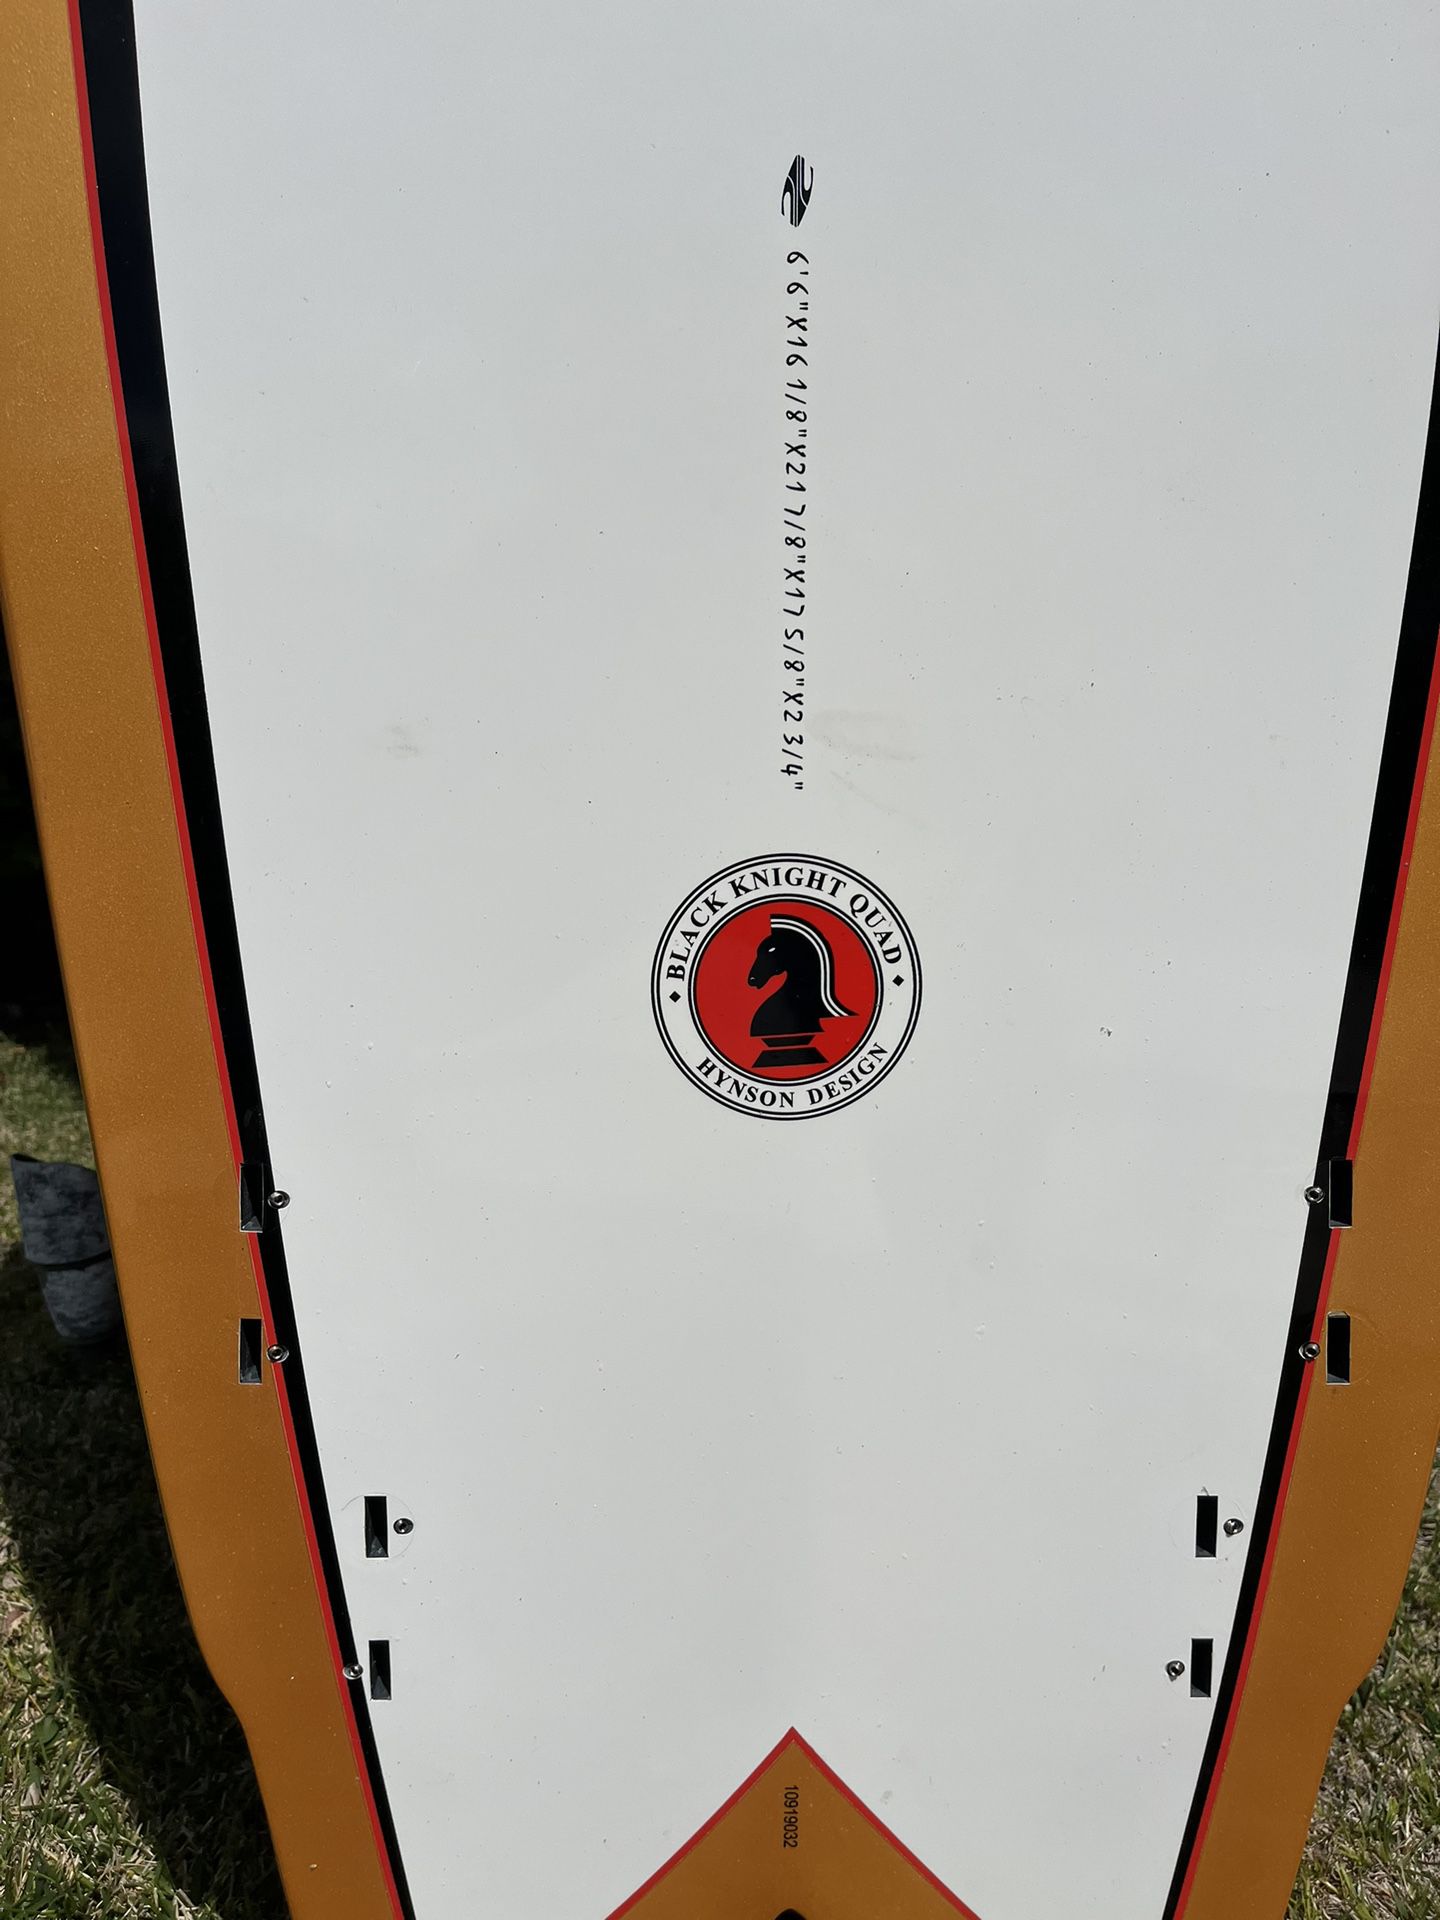 Mike Hynson 6'6 Black knight Quad Fish Surfboard for Sale in San